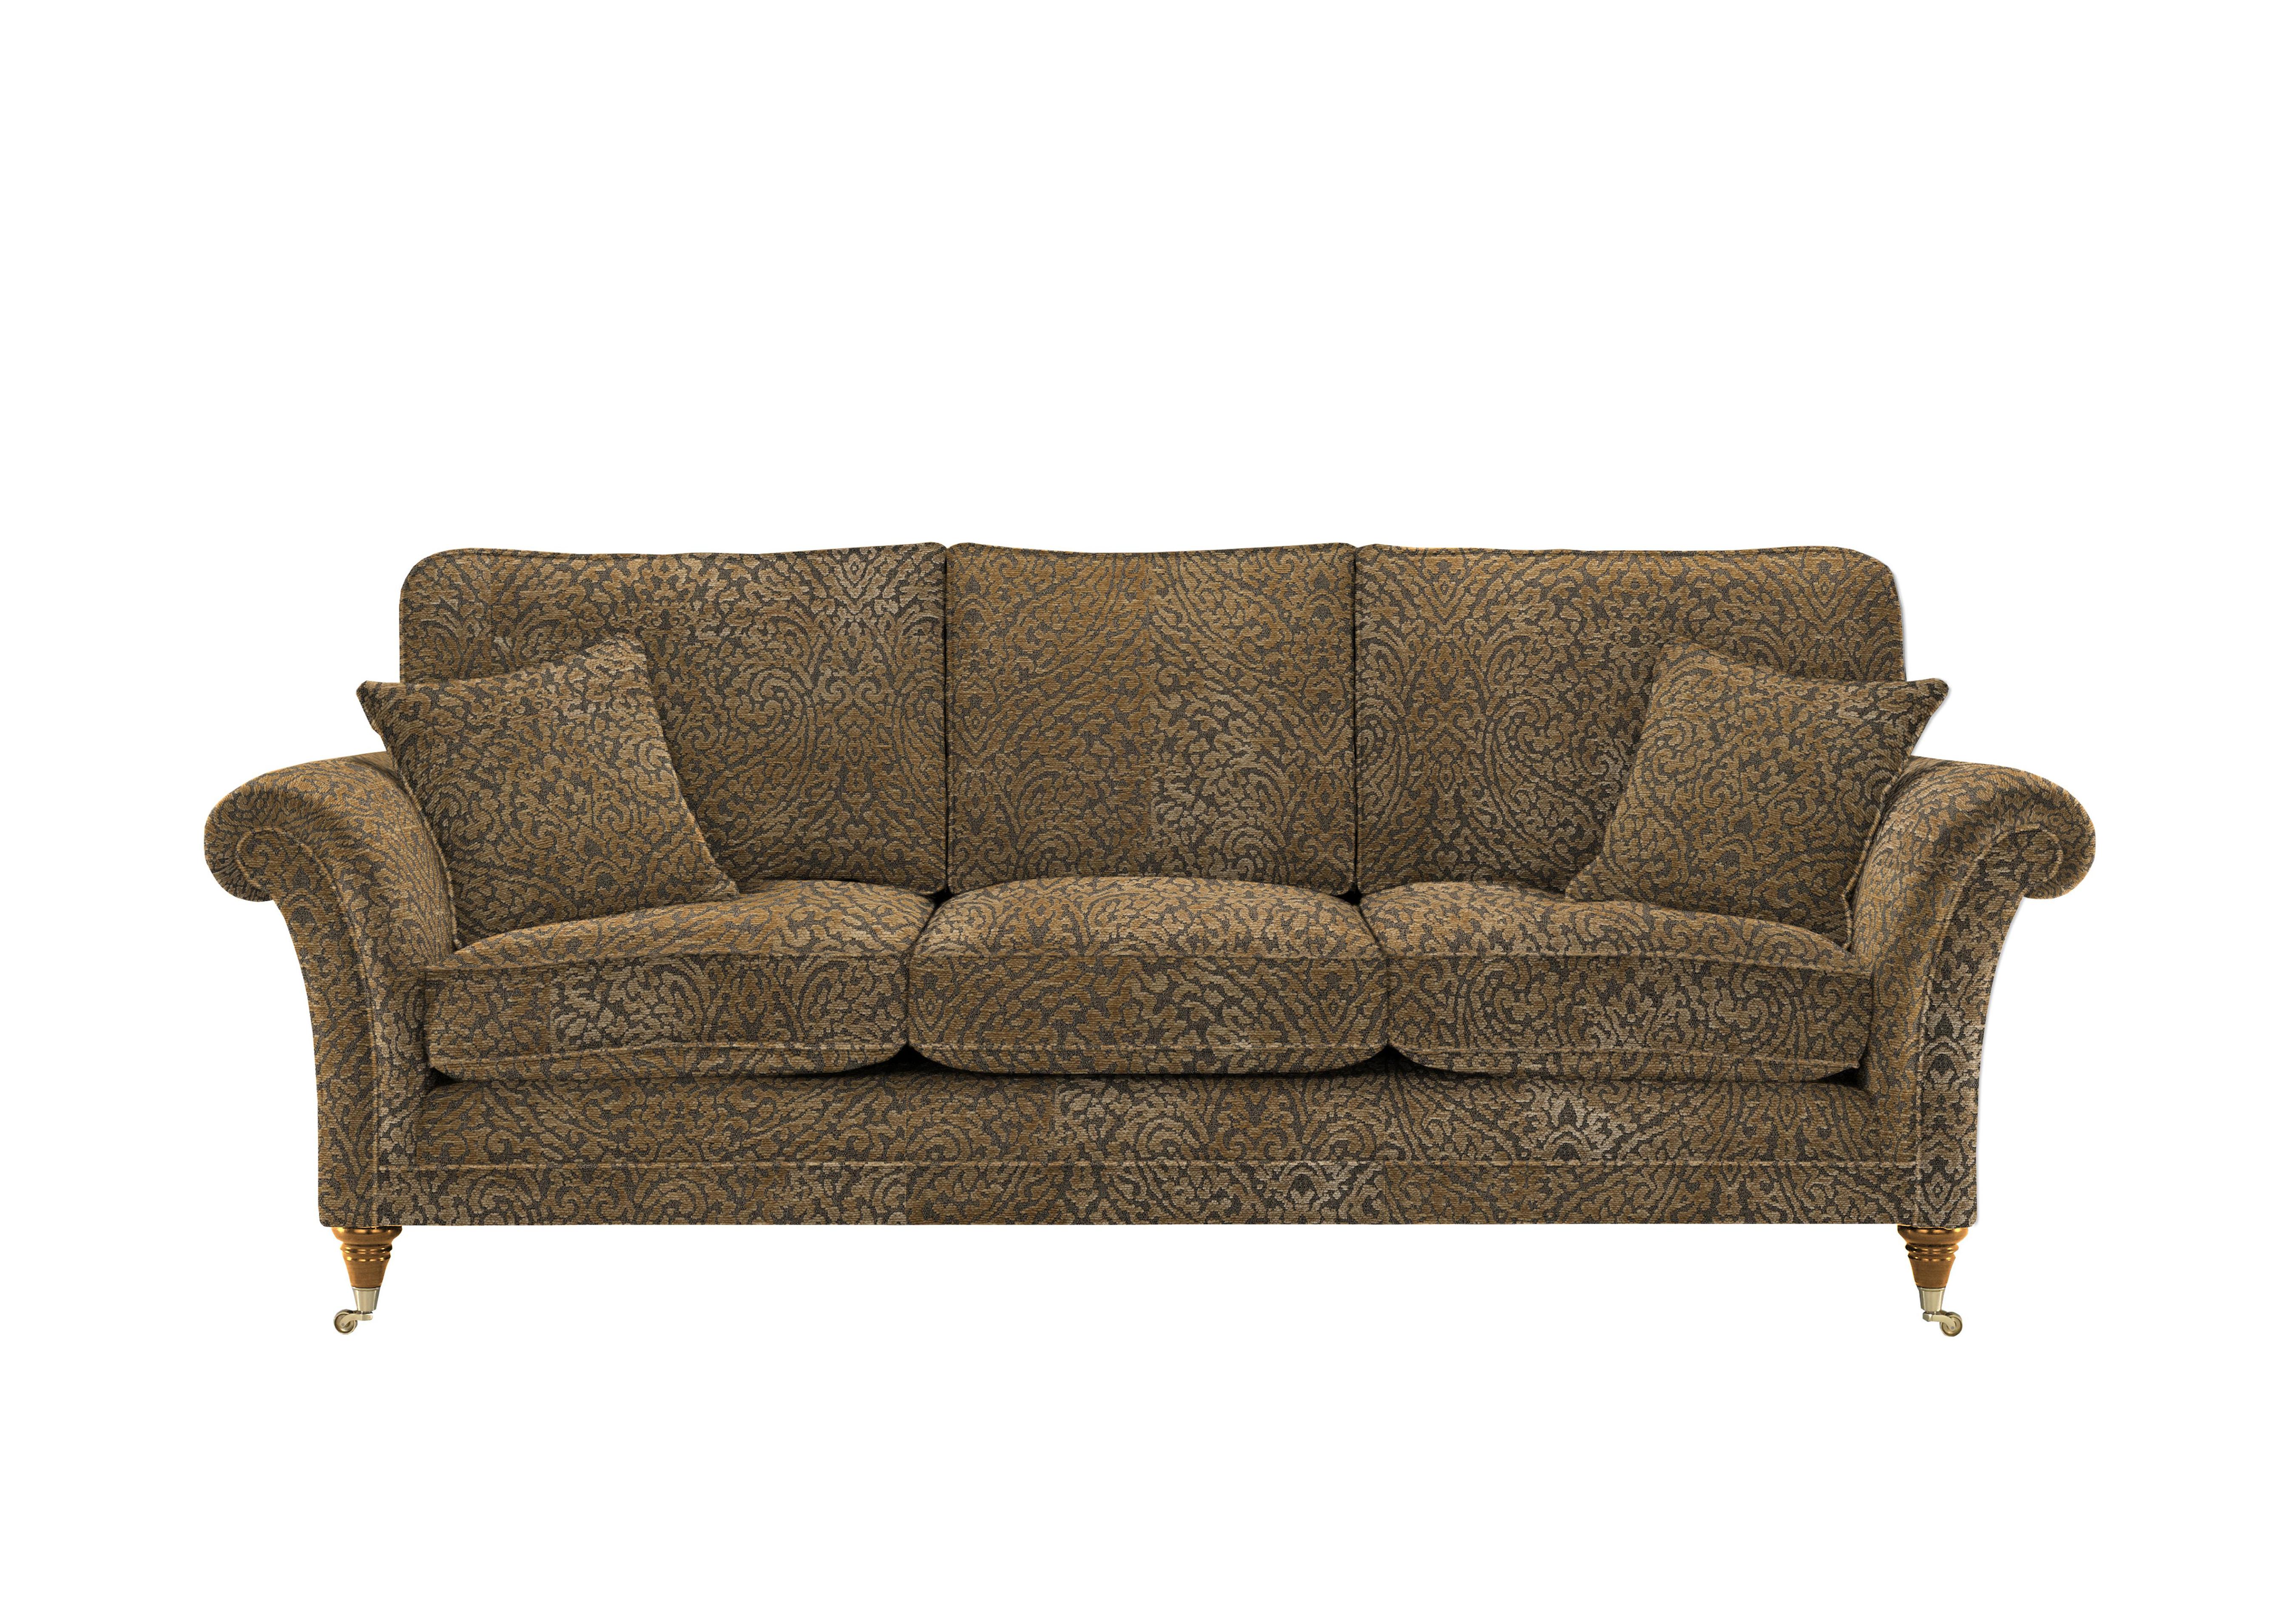 Burghley Grand 3 Seater Sofa in 002498-0031 Tess Gold on Furniture Village